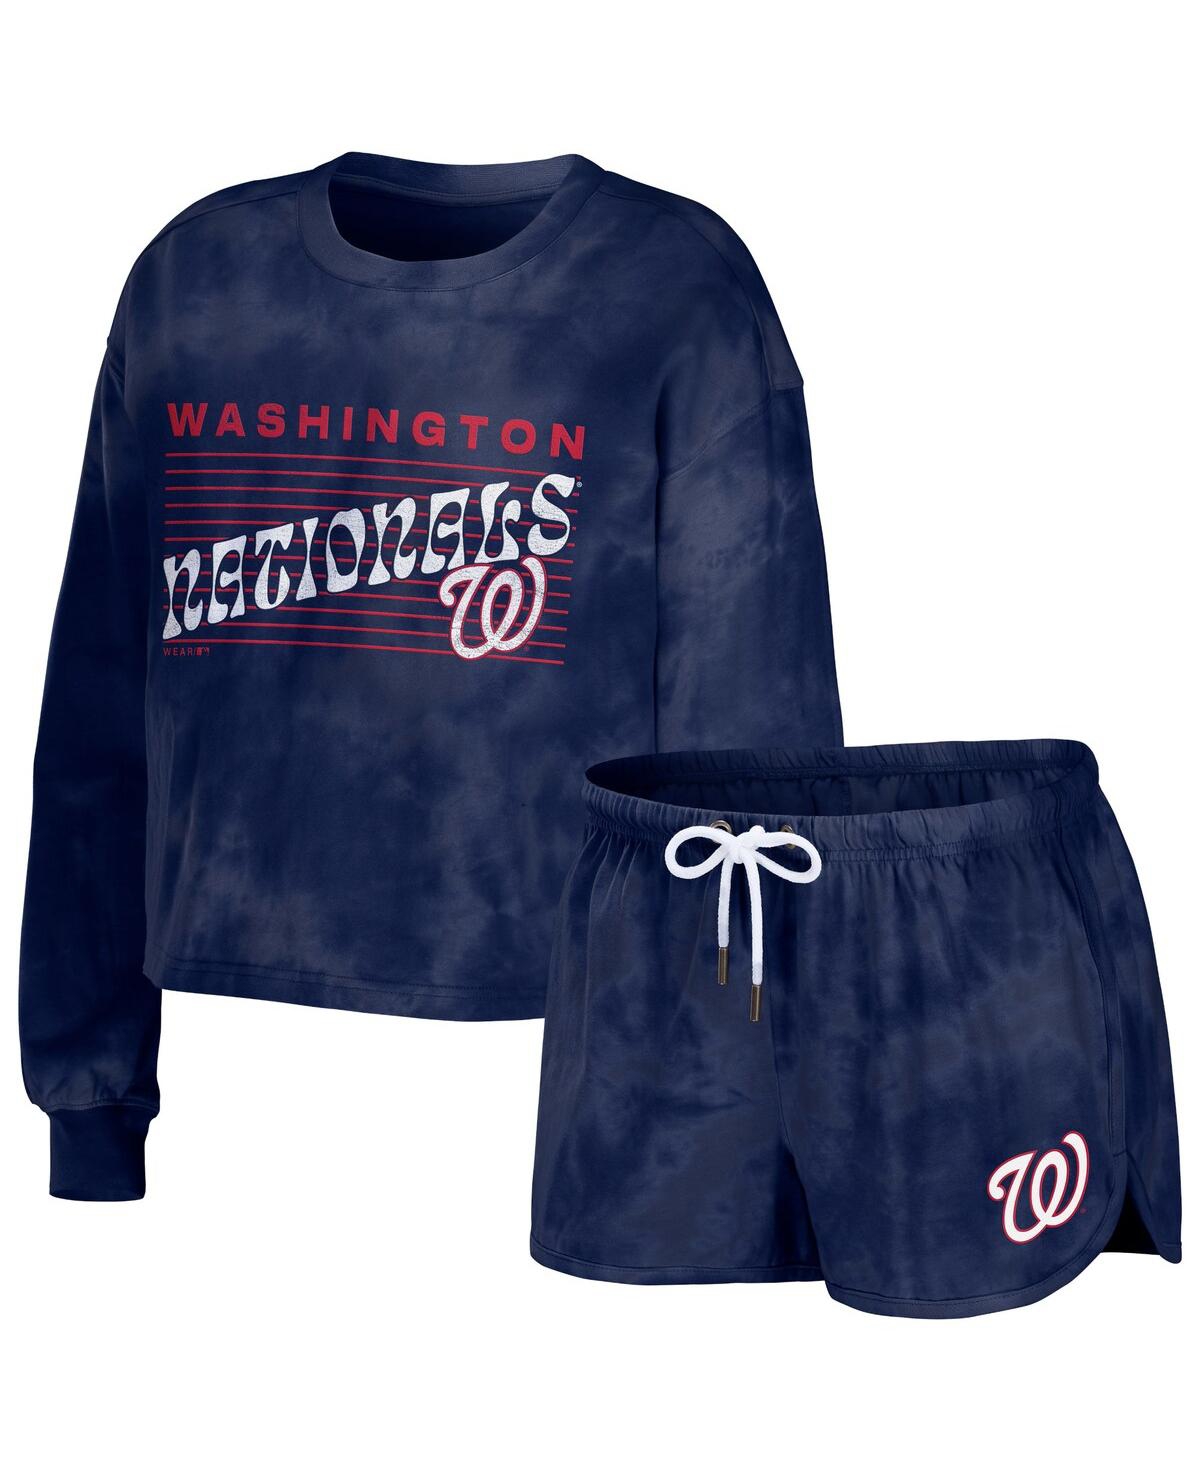 Women's Wear by Erin Andrews Navy Distressed Washington Nationals Tie-Dye Cropped Pullover Sweatshirt and Shorts Lounge Set - Navy